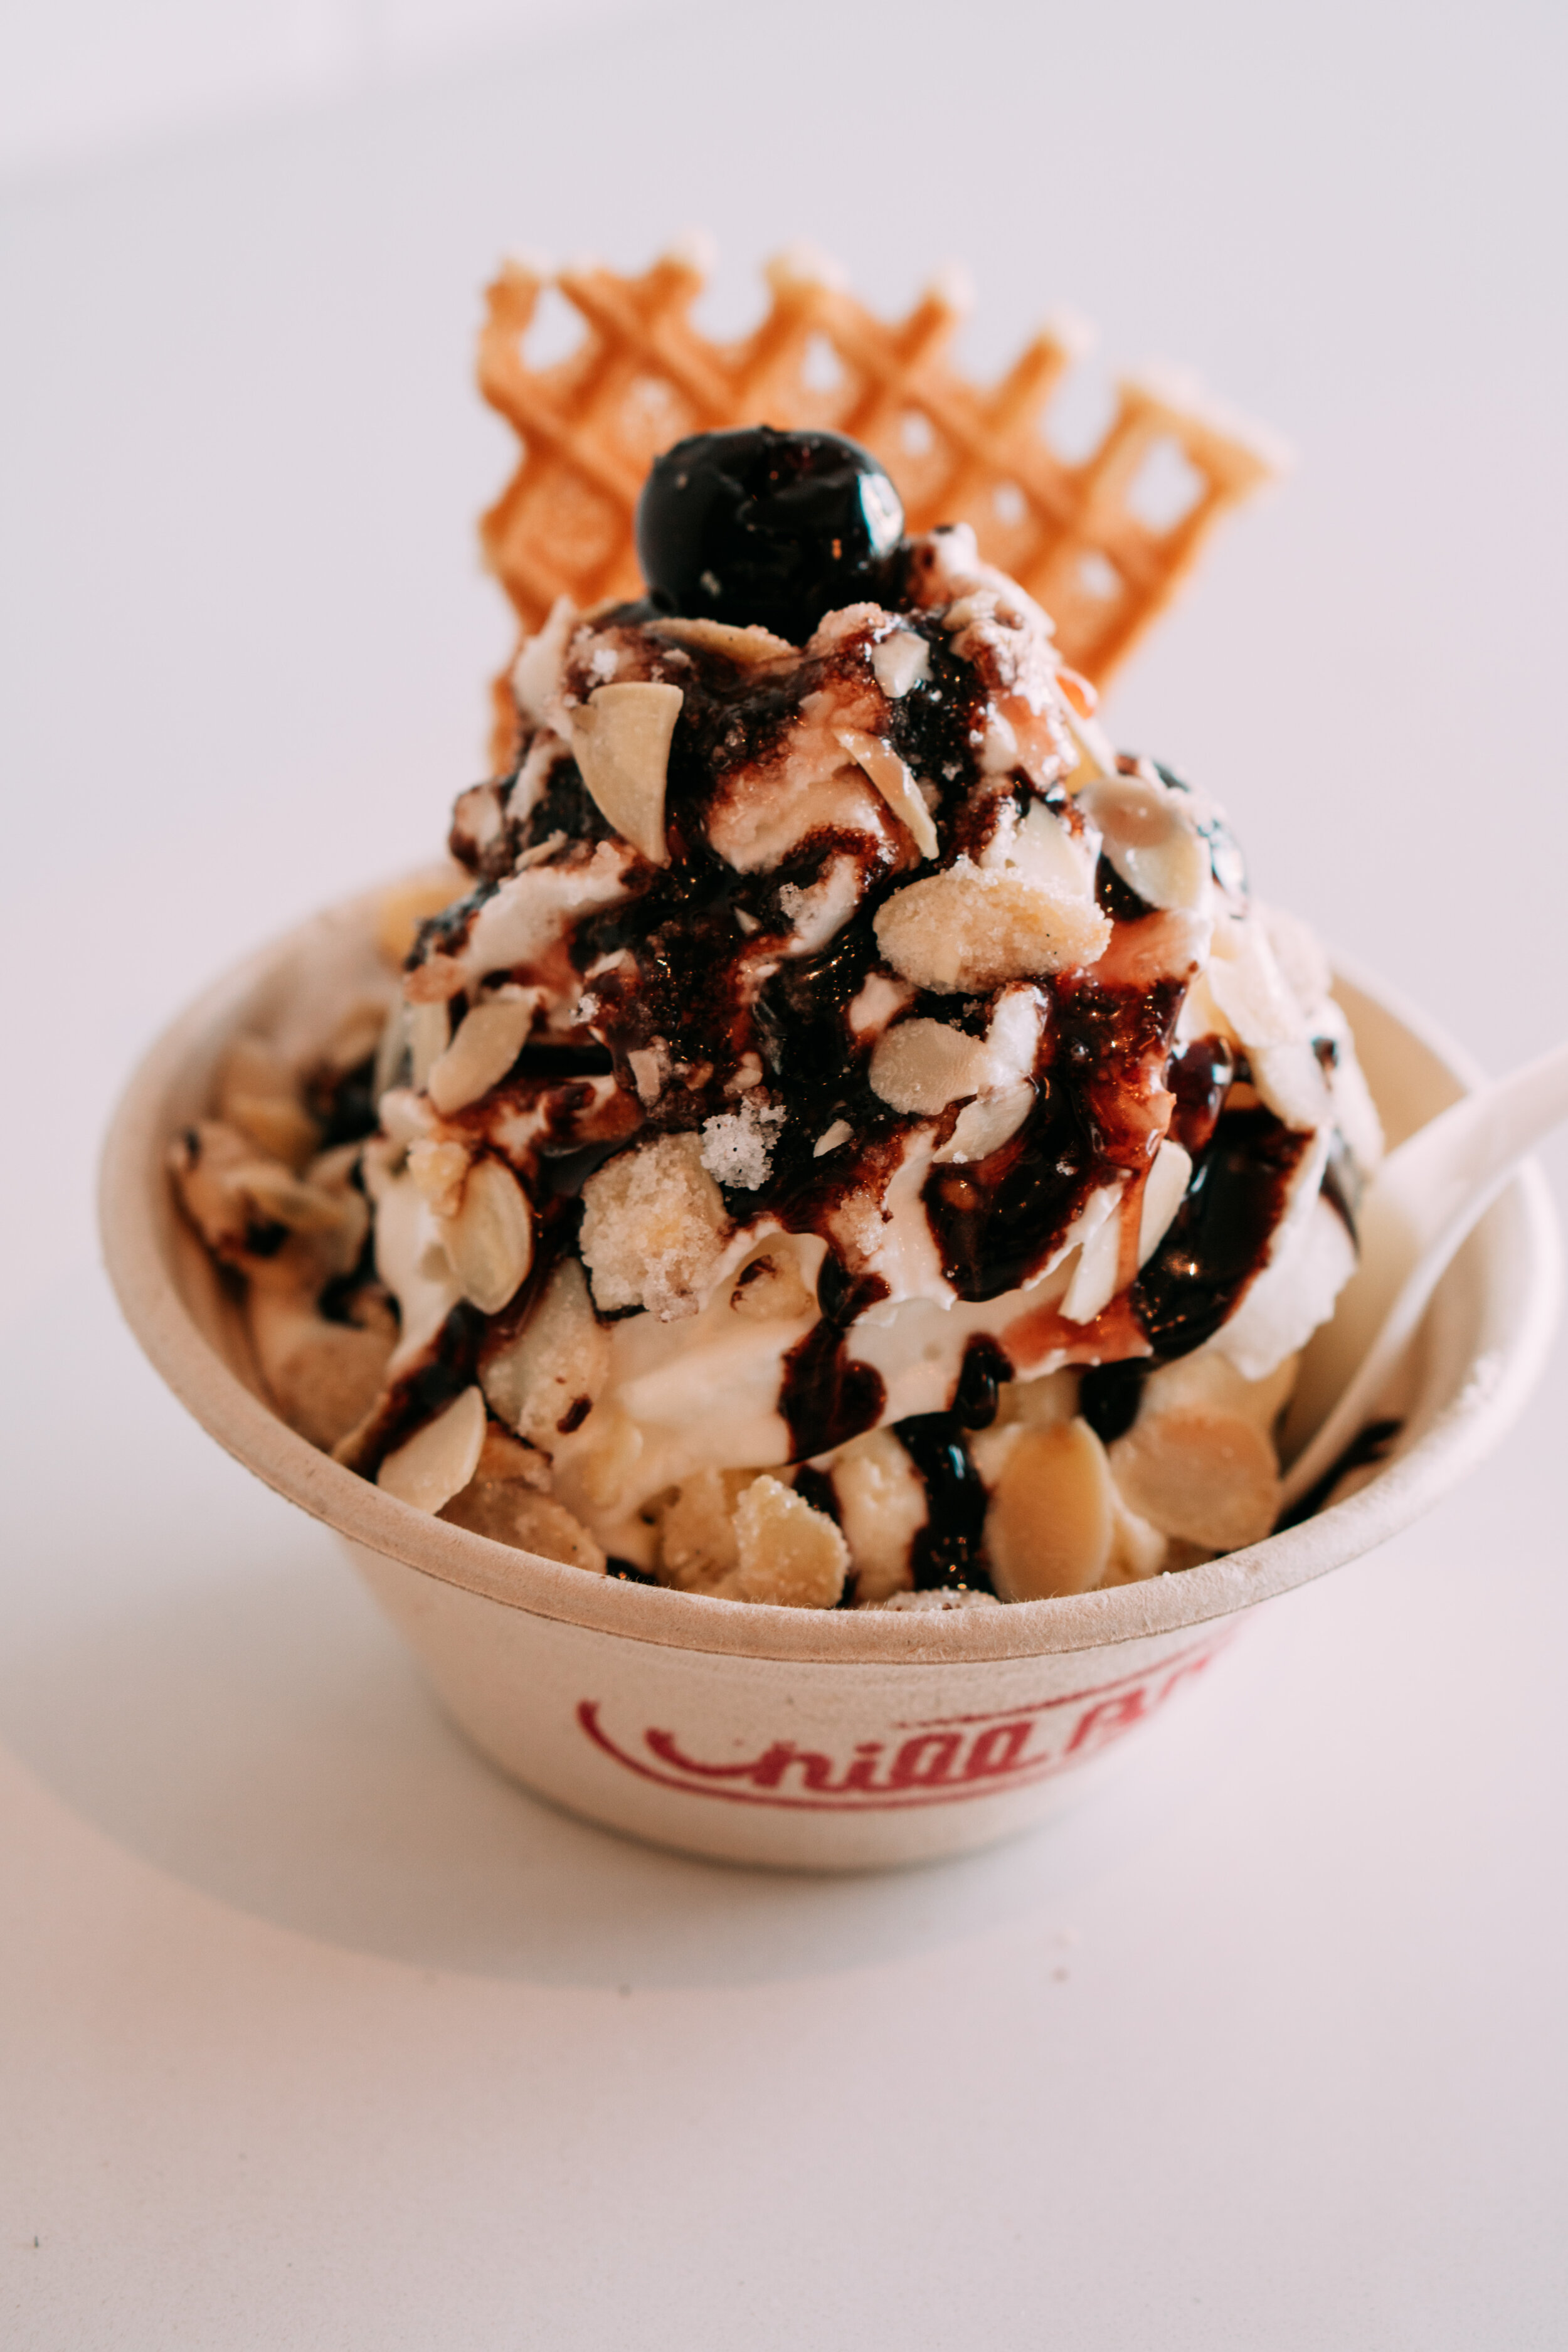 a single scoop sunday with hot fudge, whipped cream, candied almonds and a cherry on top 